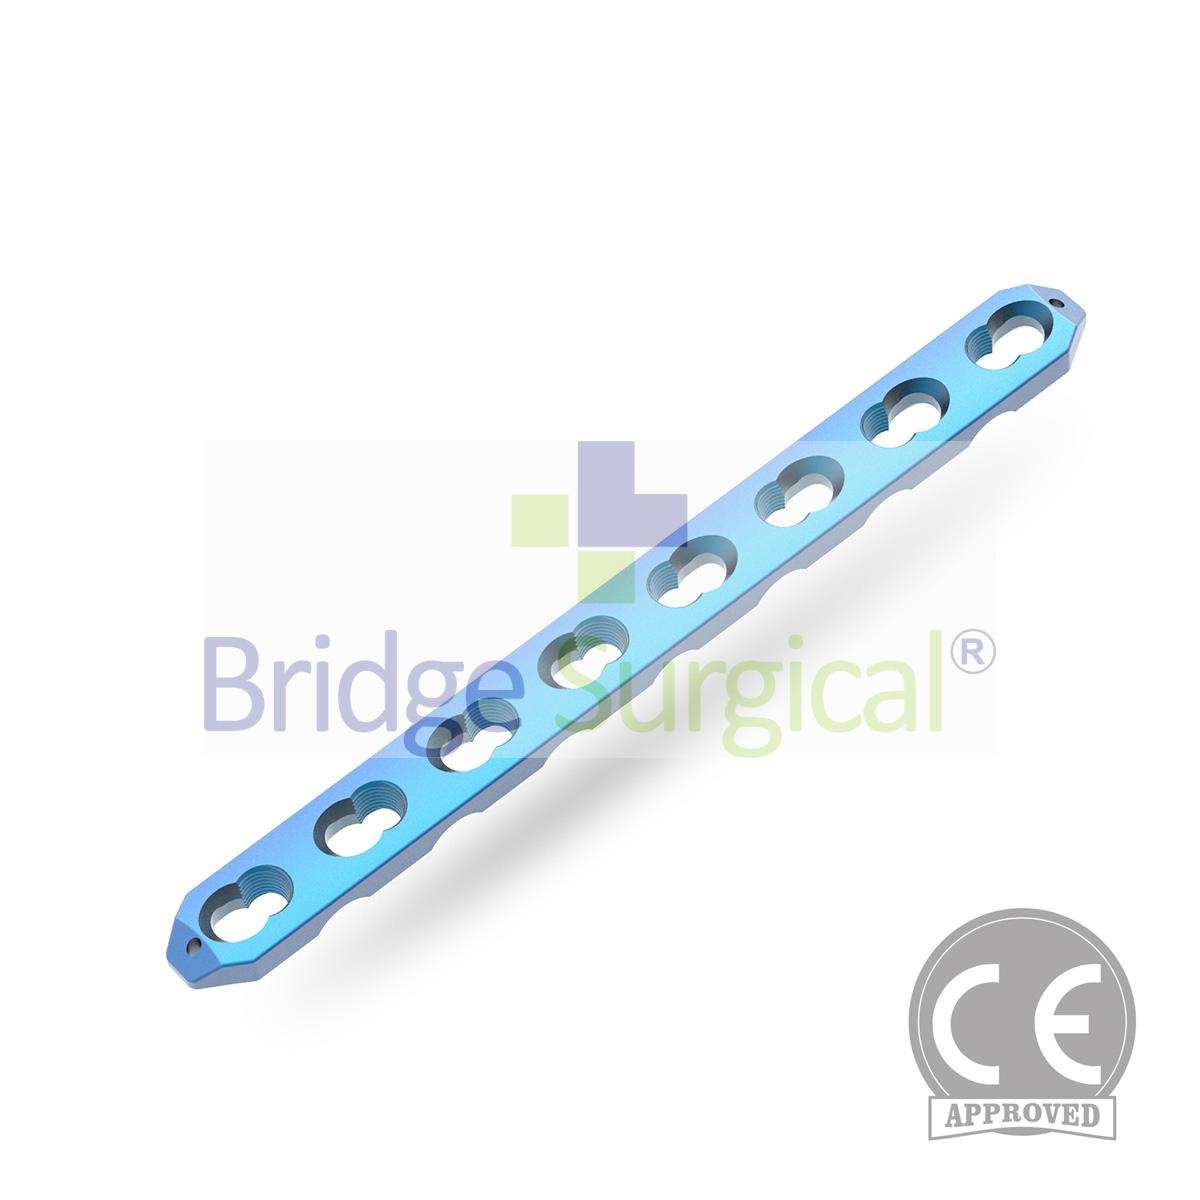 https://ortho.com.pk/wp-content/uploads/2022/02/18.-4.5-5.0mm-Wise-Lock-Narrow-Dynamic-Compression-Plate-with-LC-under-cuts-1-2.jpg?v=1672606733